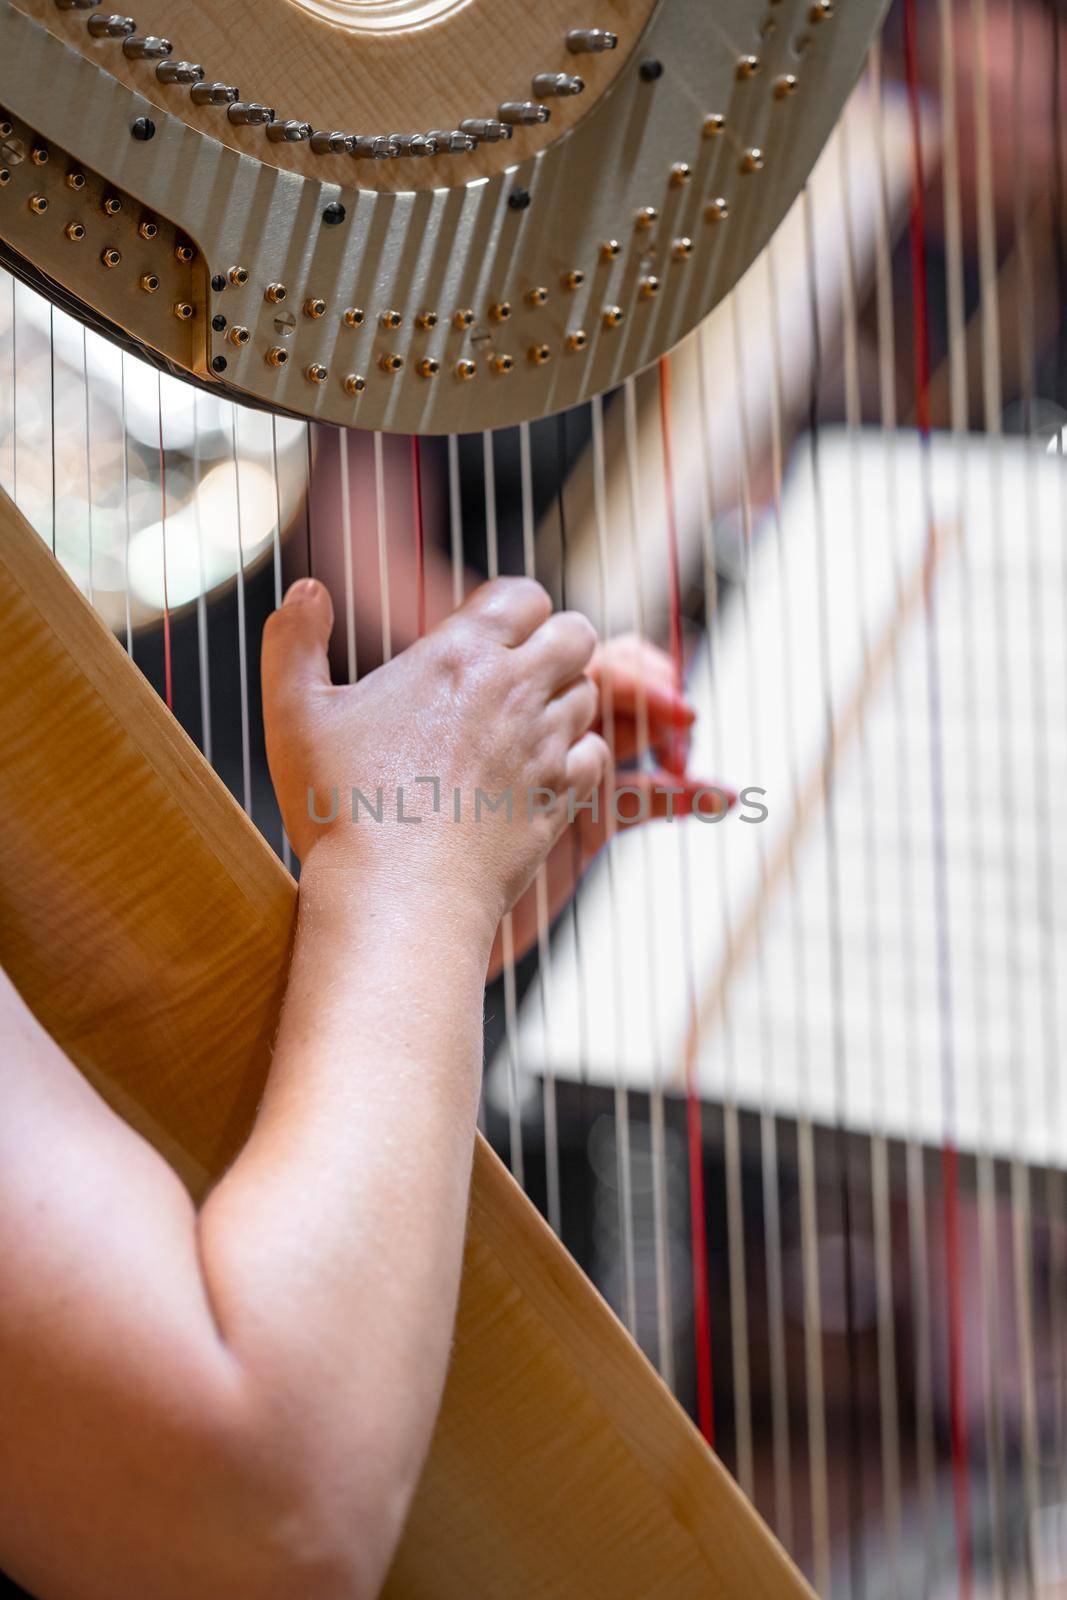 harp on symphony orchestra stage, detail of hands with strings by Edophoto